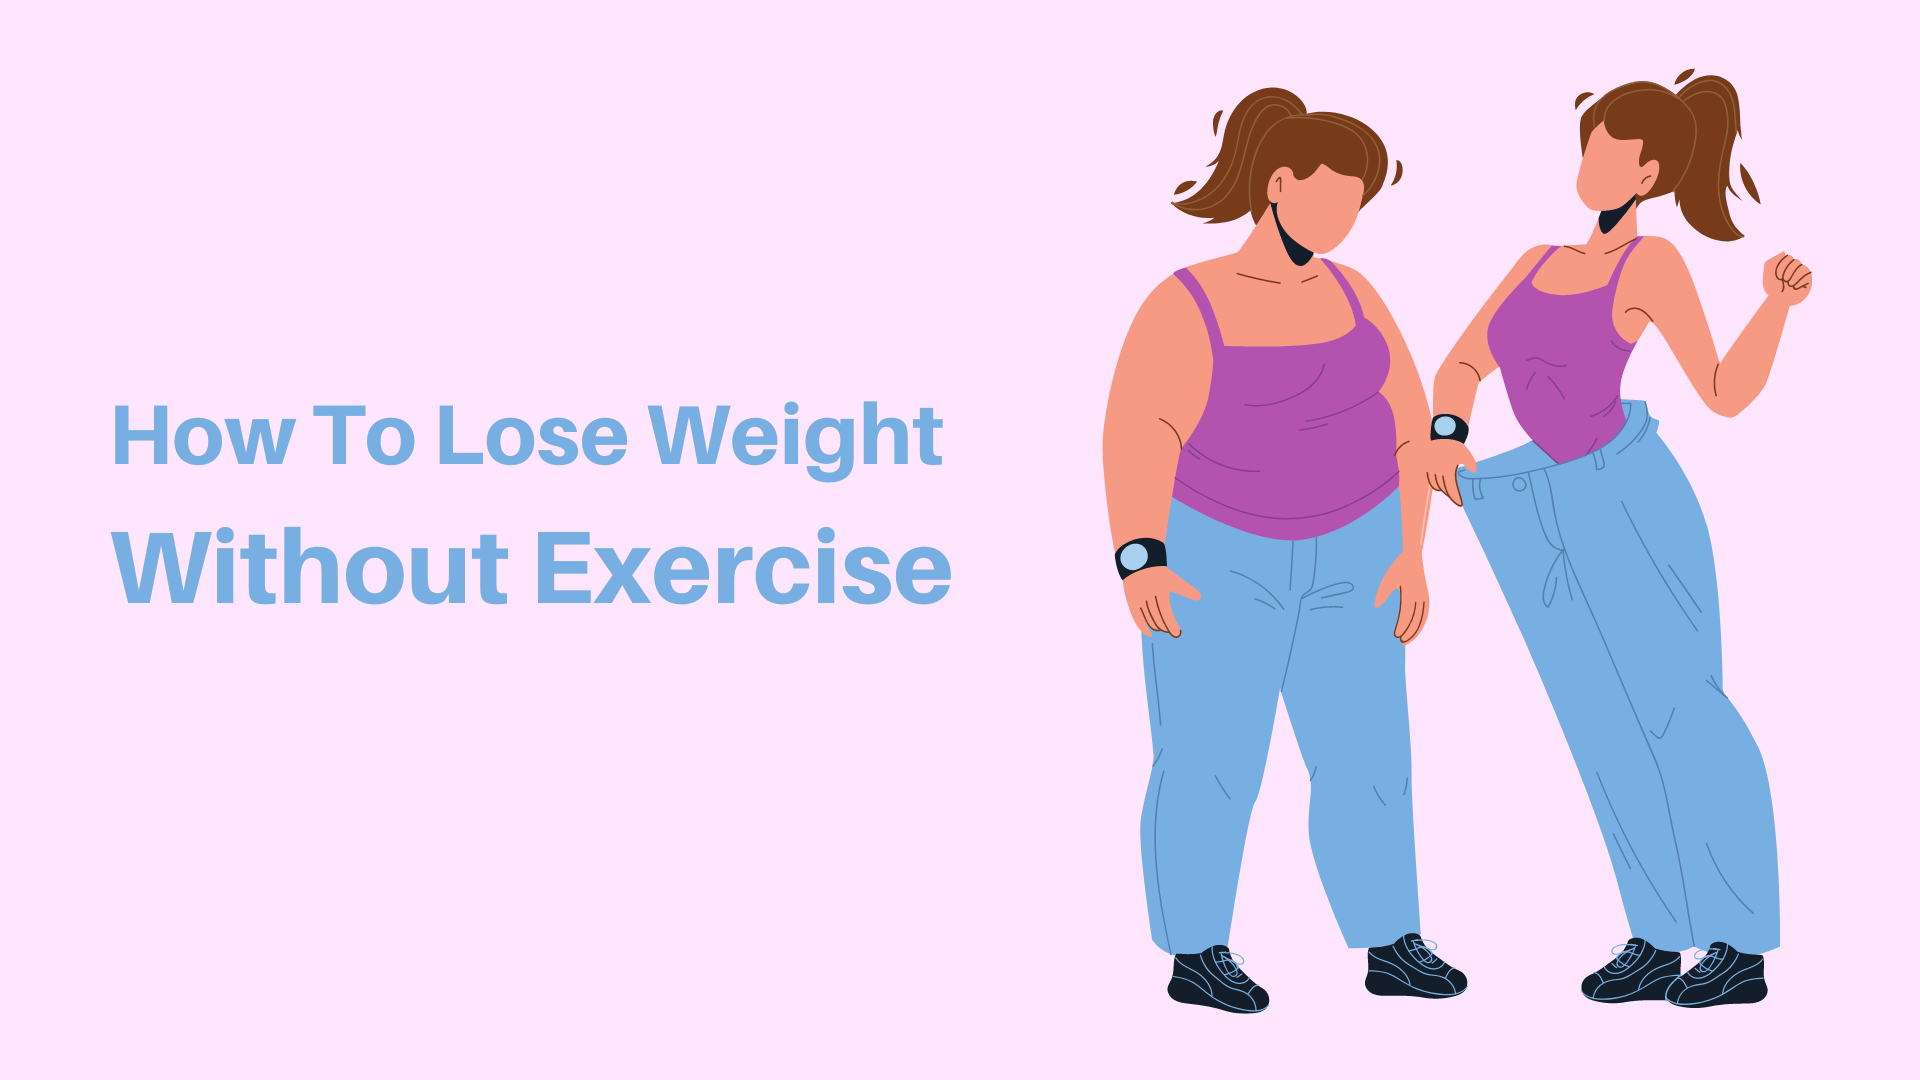 How To Lose Weight Without Exercise: Proven Tips for a Healthier You